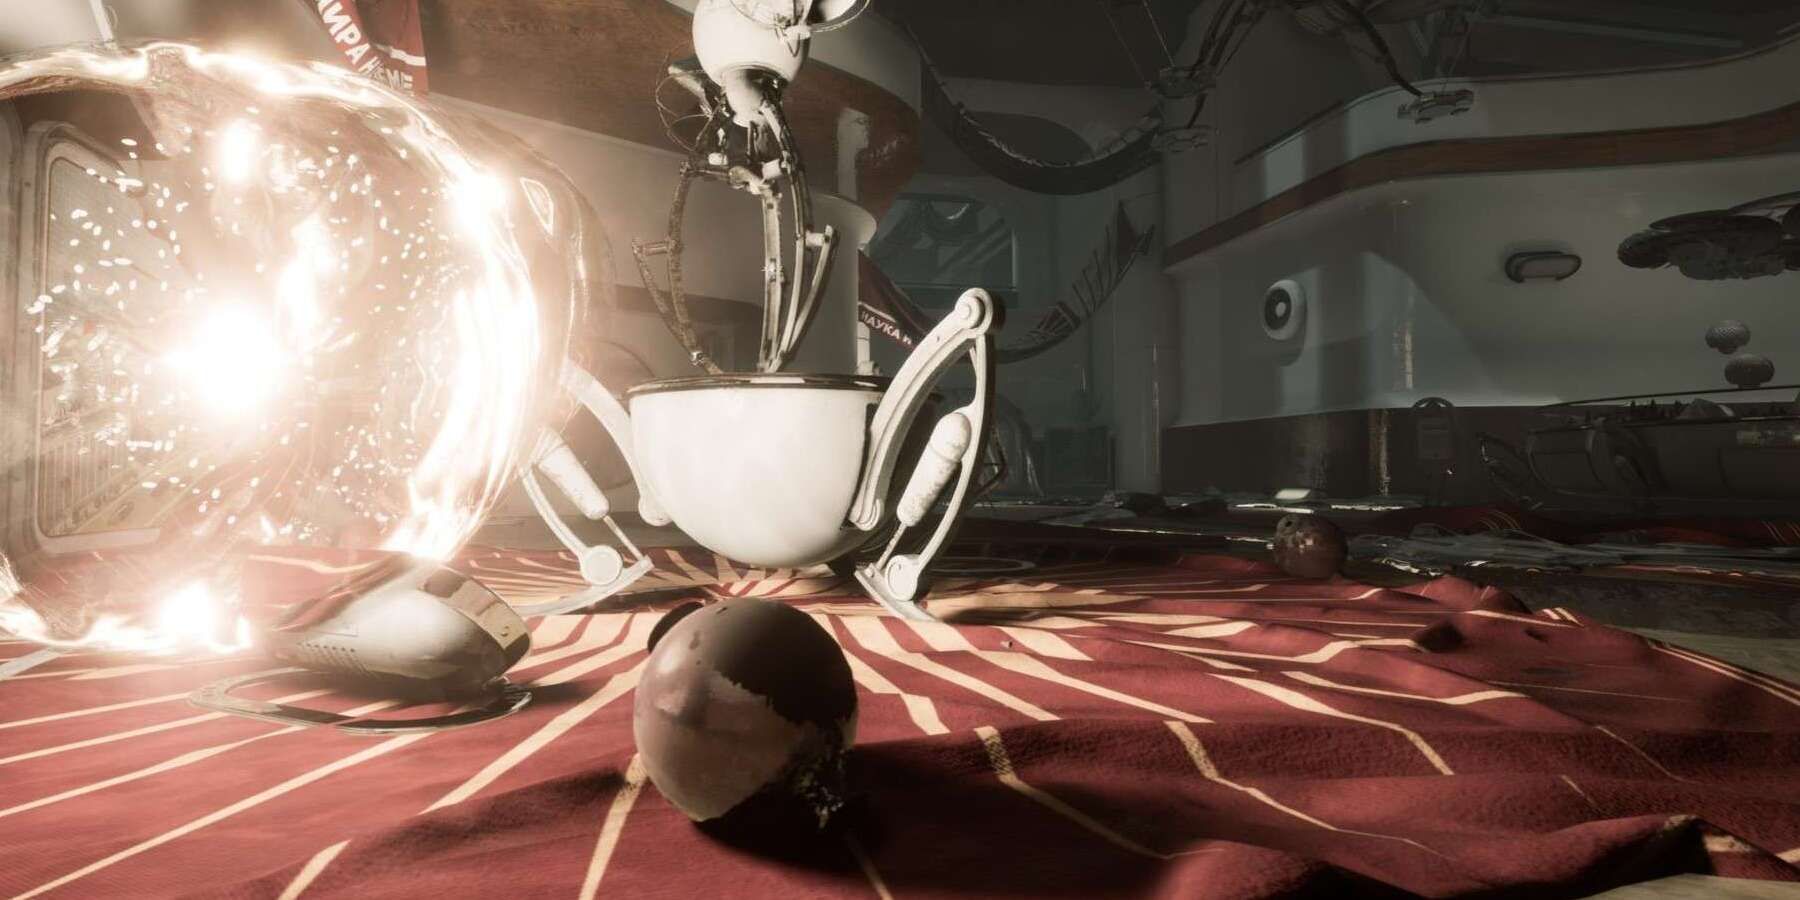 Atomic Heart, ray tracing poster child, won't support ray tracing for PC on  launch